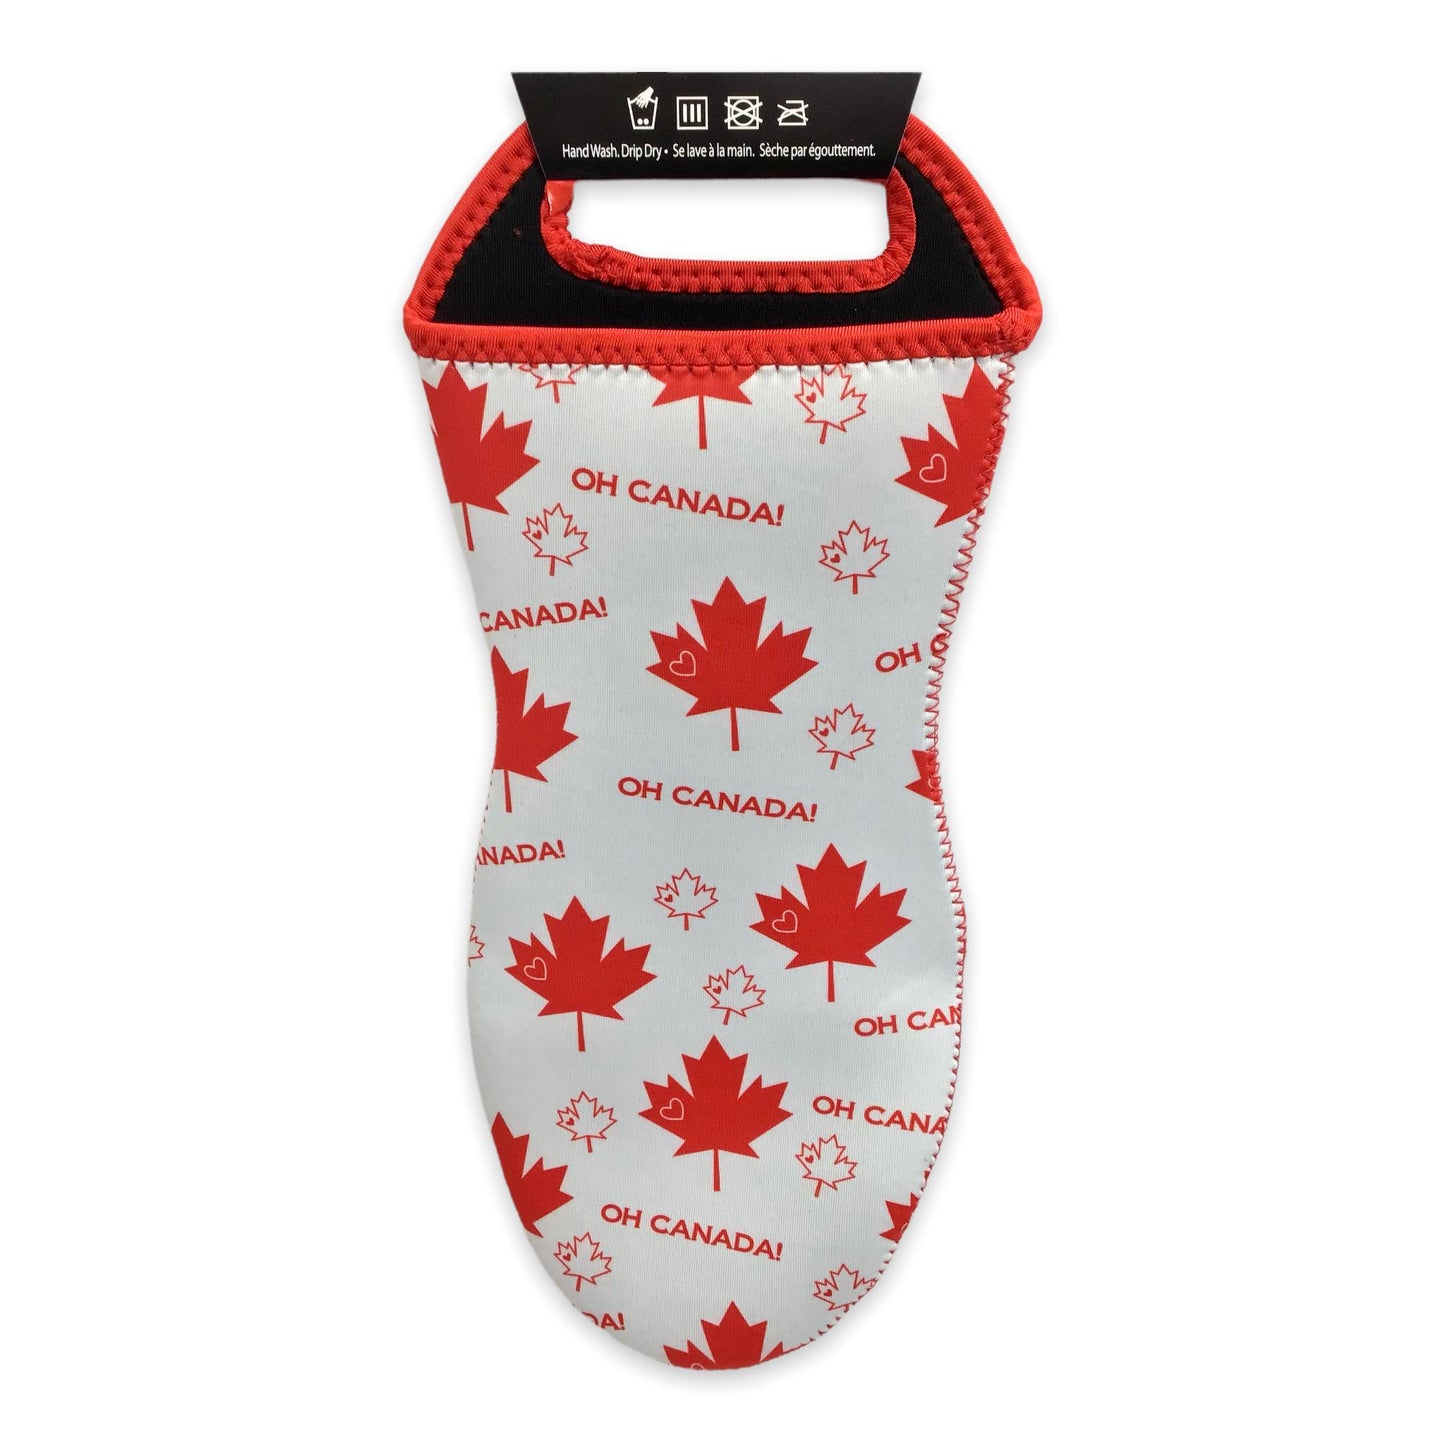 Protect Your Hands with Our Canadian Maple Leaf Oven Mitt